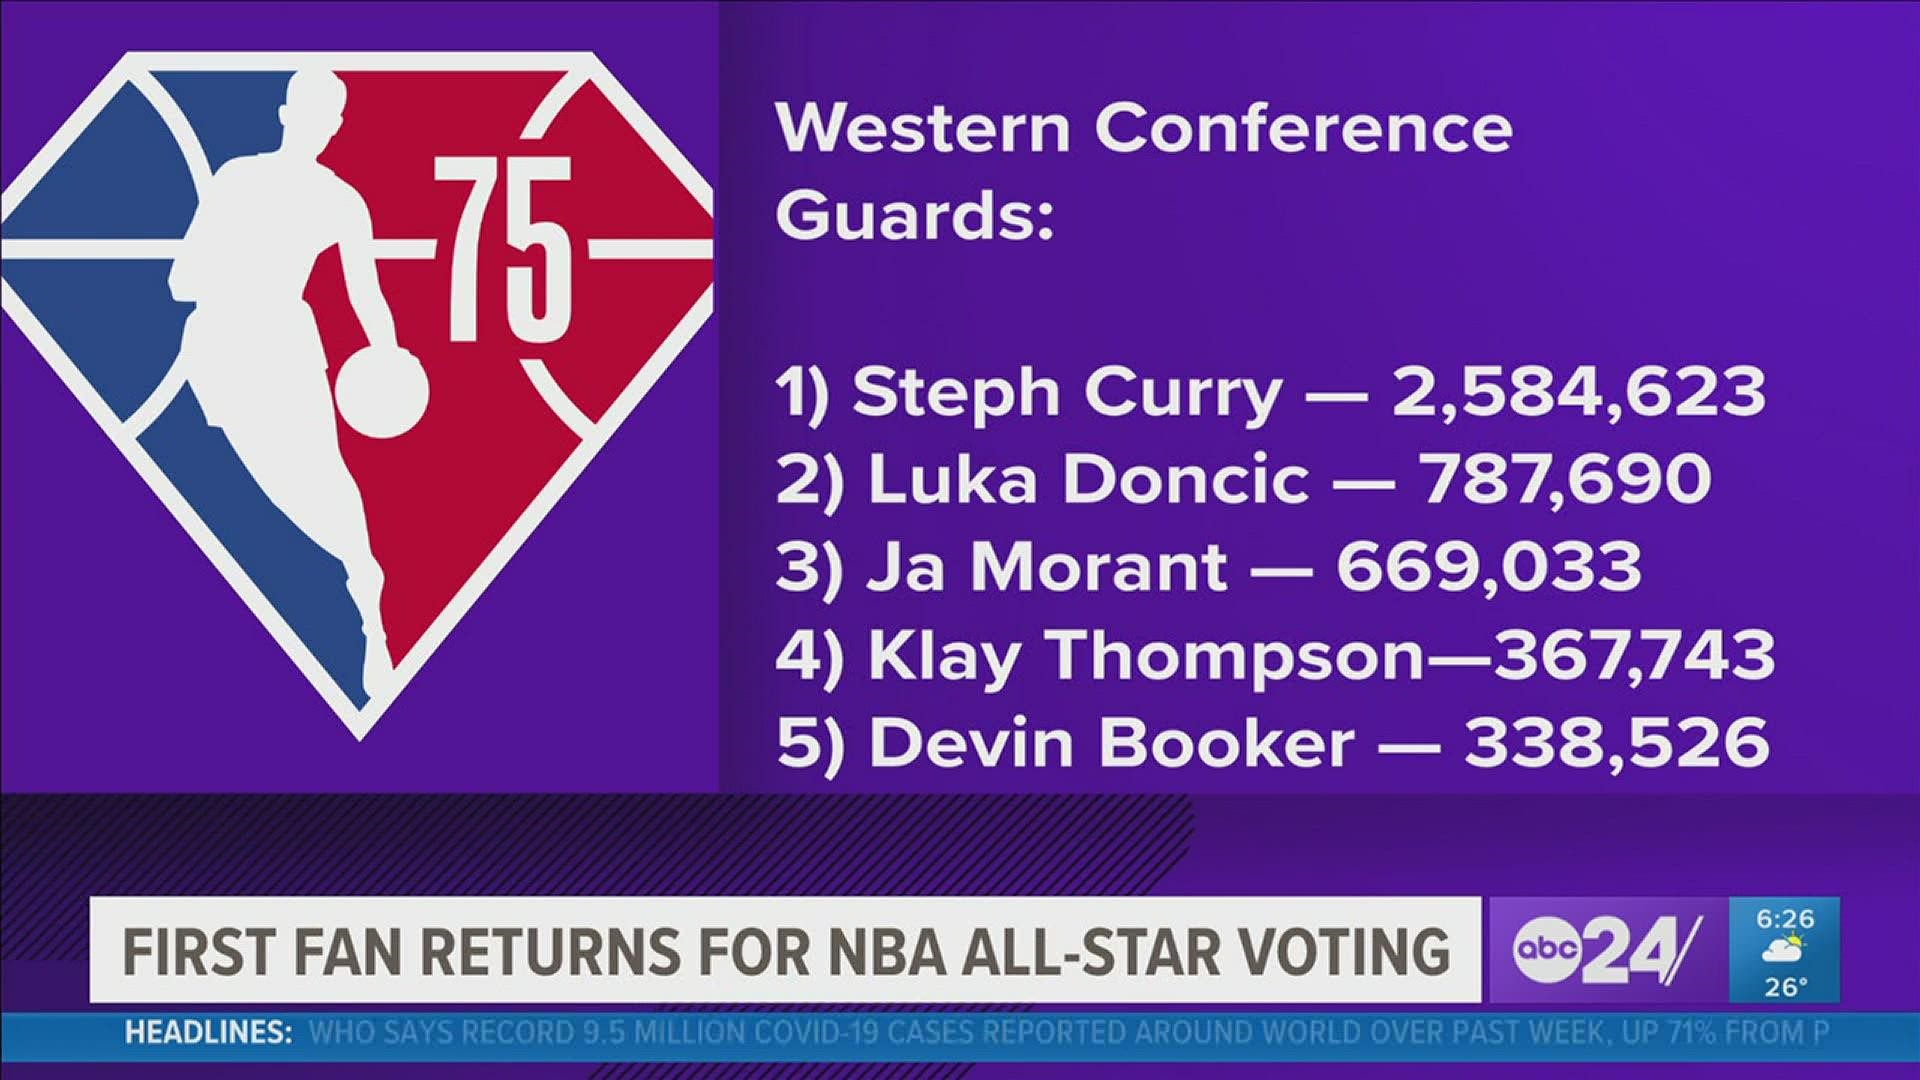 Grizzlies star has the 3rd most fan votes among Western Conference guards for the All-Star game